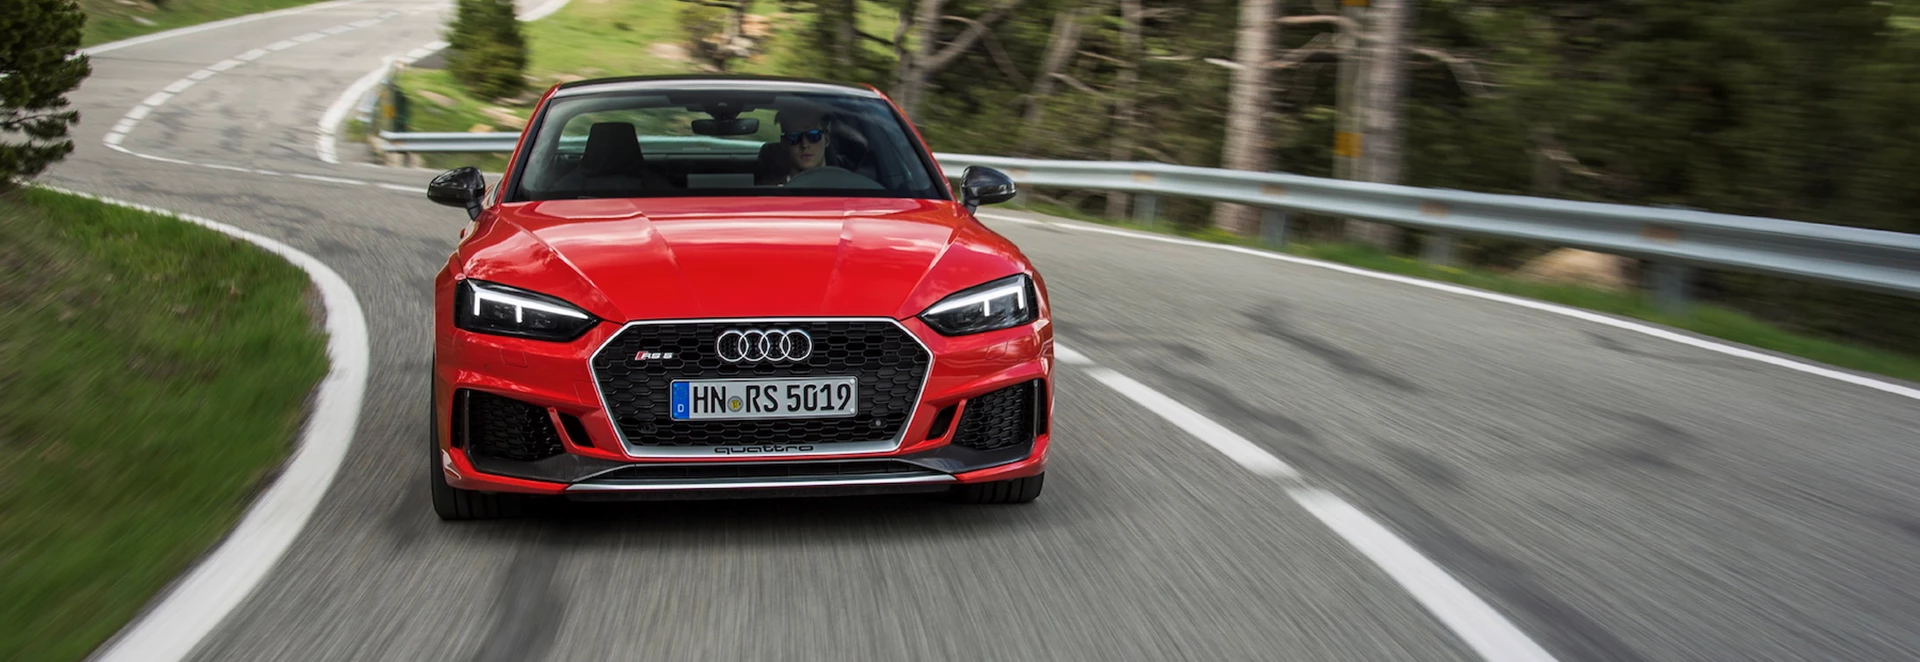 Audi unveils Carbon Edition models for RS 4 and RS 5 models 